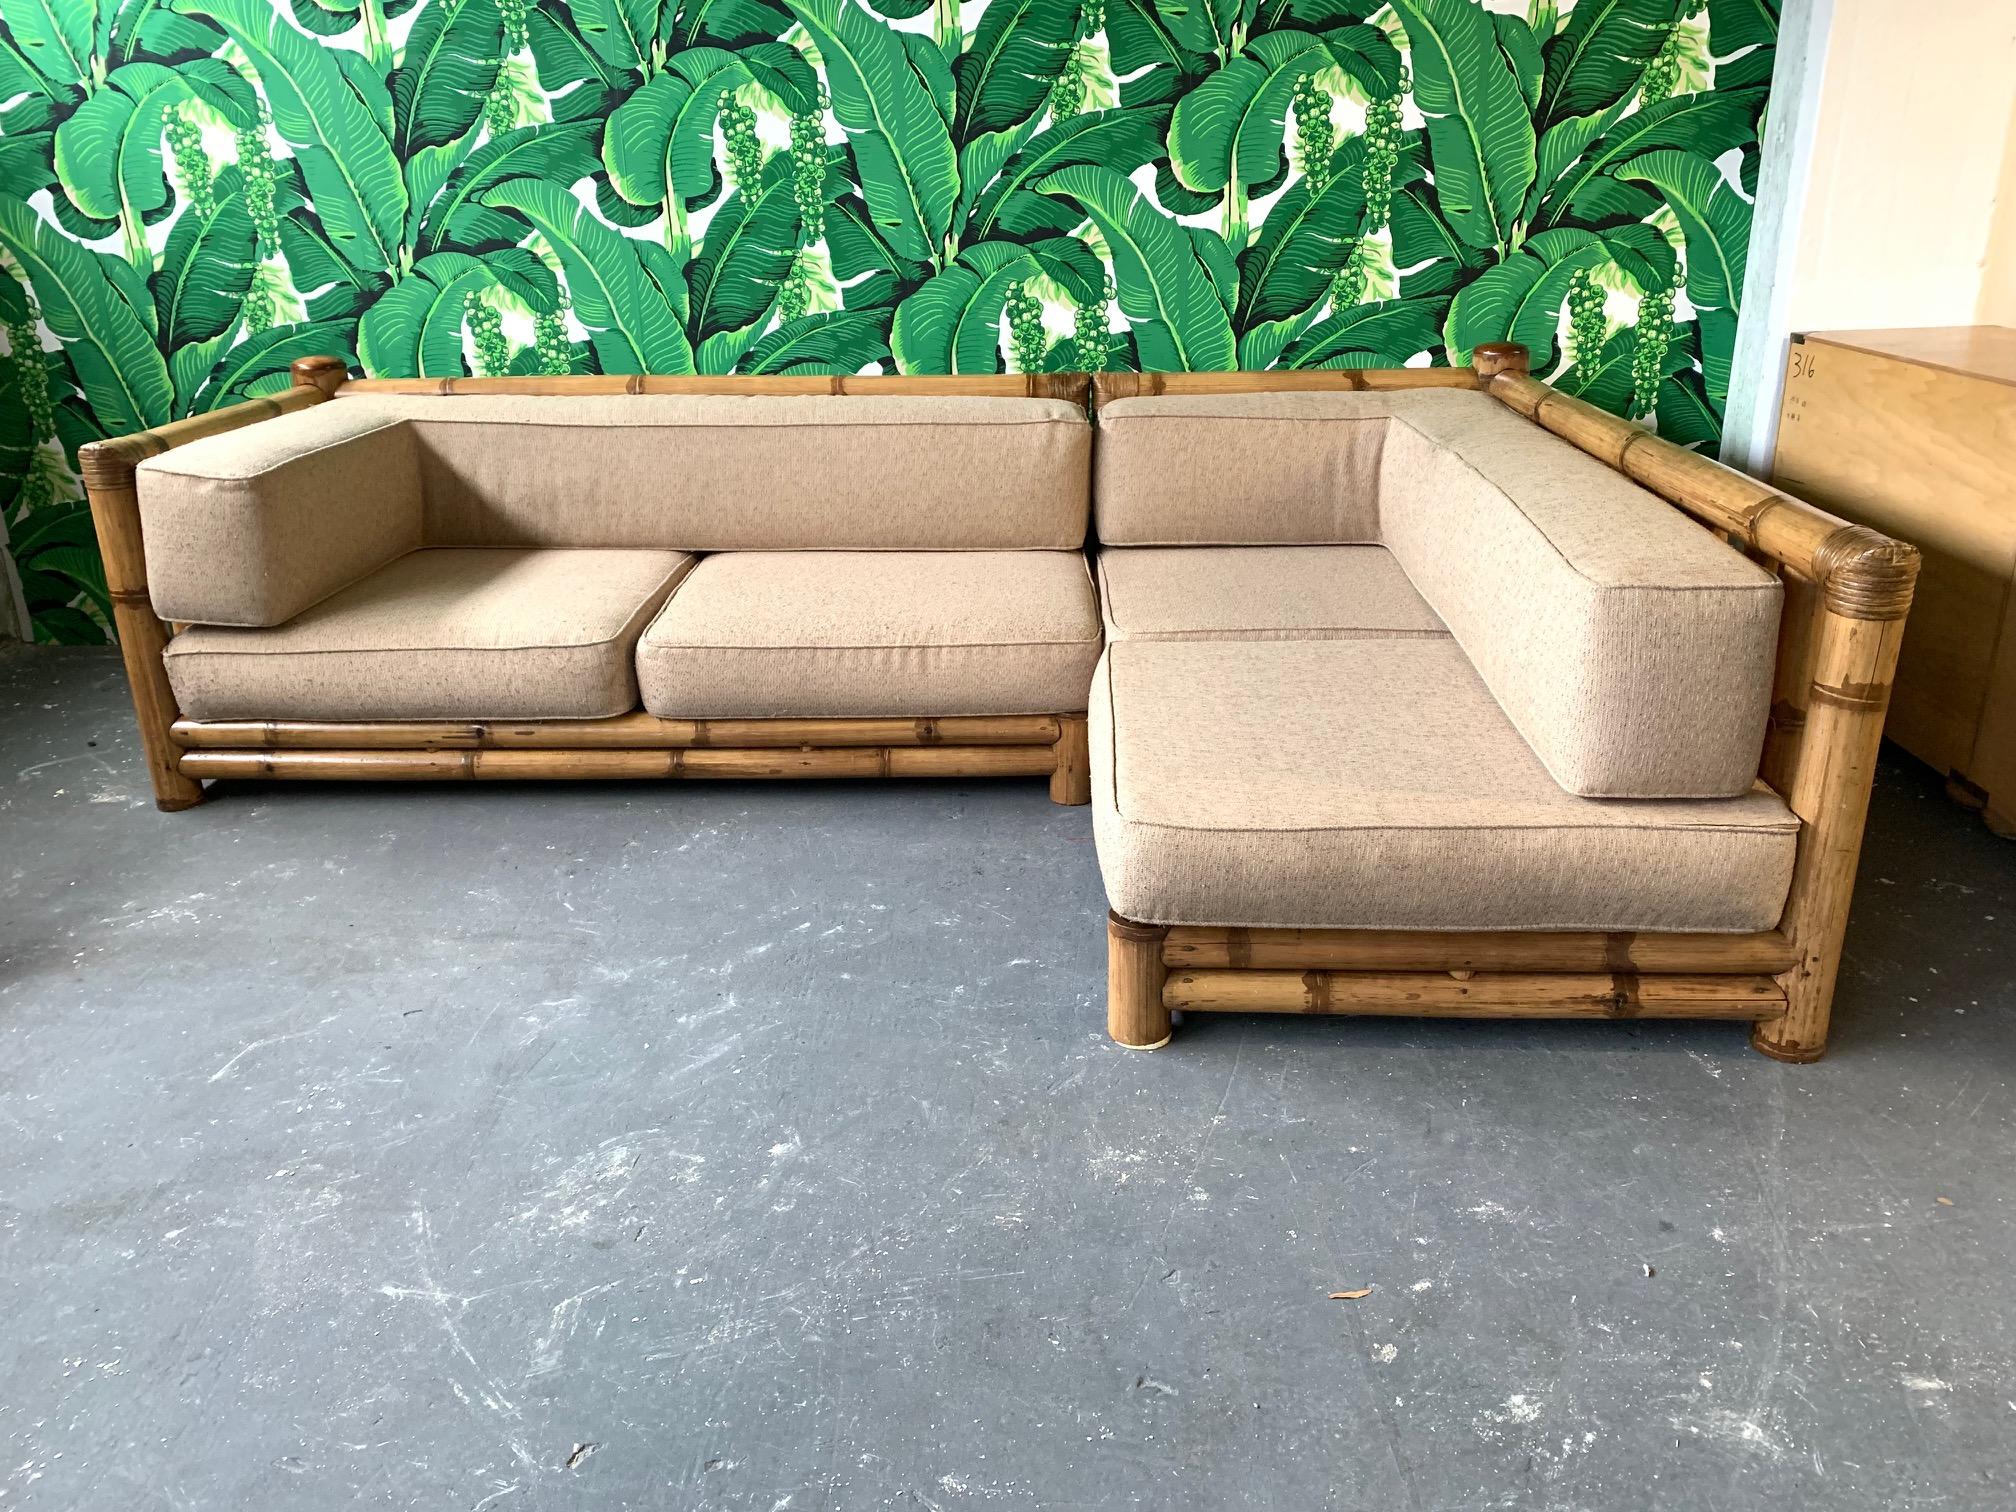 Vintage sectional sofa constructed from oversized bamboo features two separate sections and large, comfortable cushions. Very good condition with very minor signs of age appropriate wear.